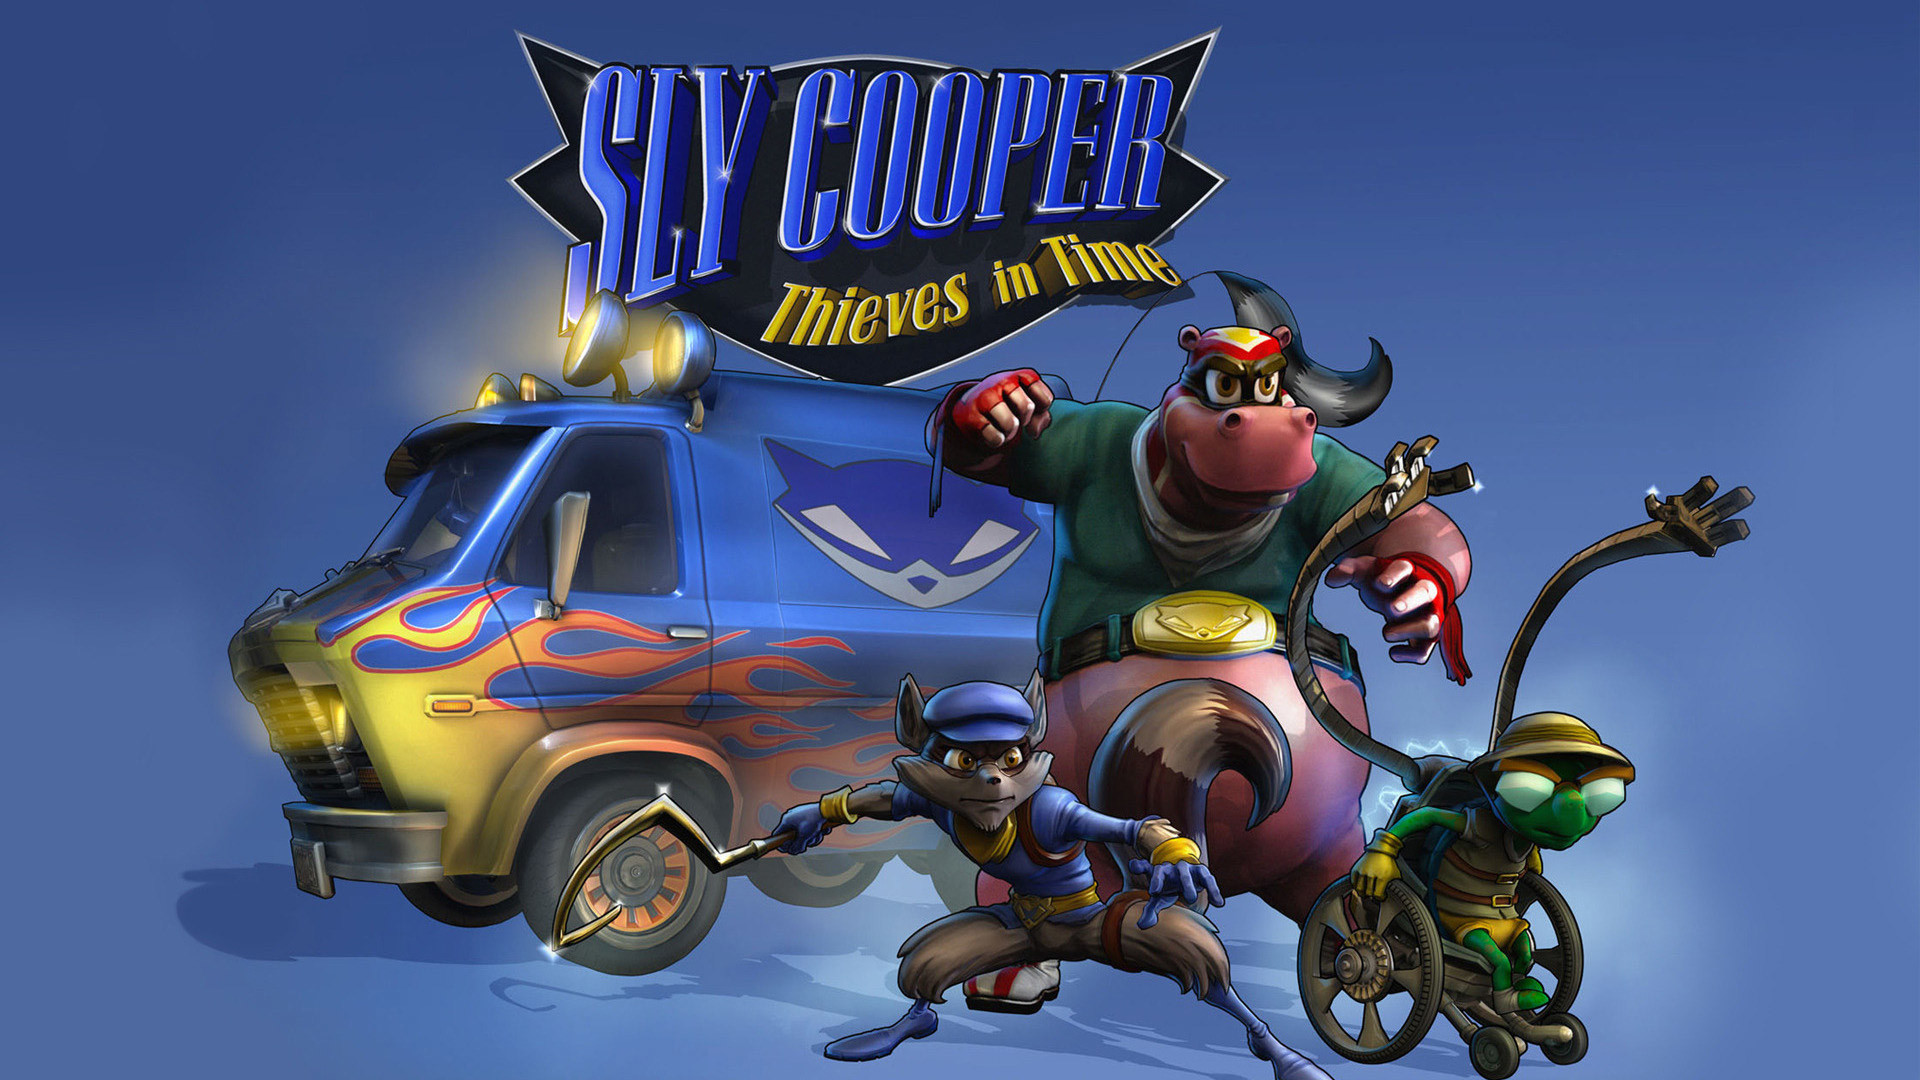 1920x1080 Free Sly Cooper: Thieves in Time Wallpaper in 